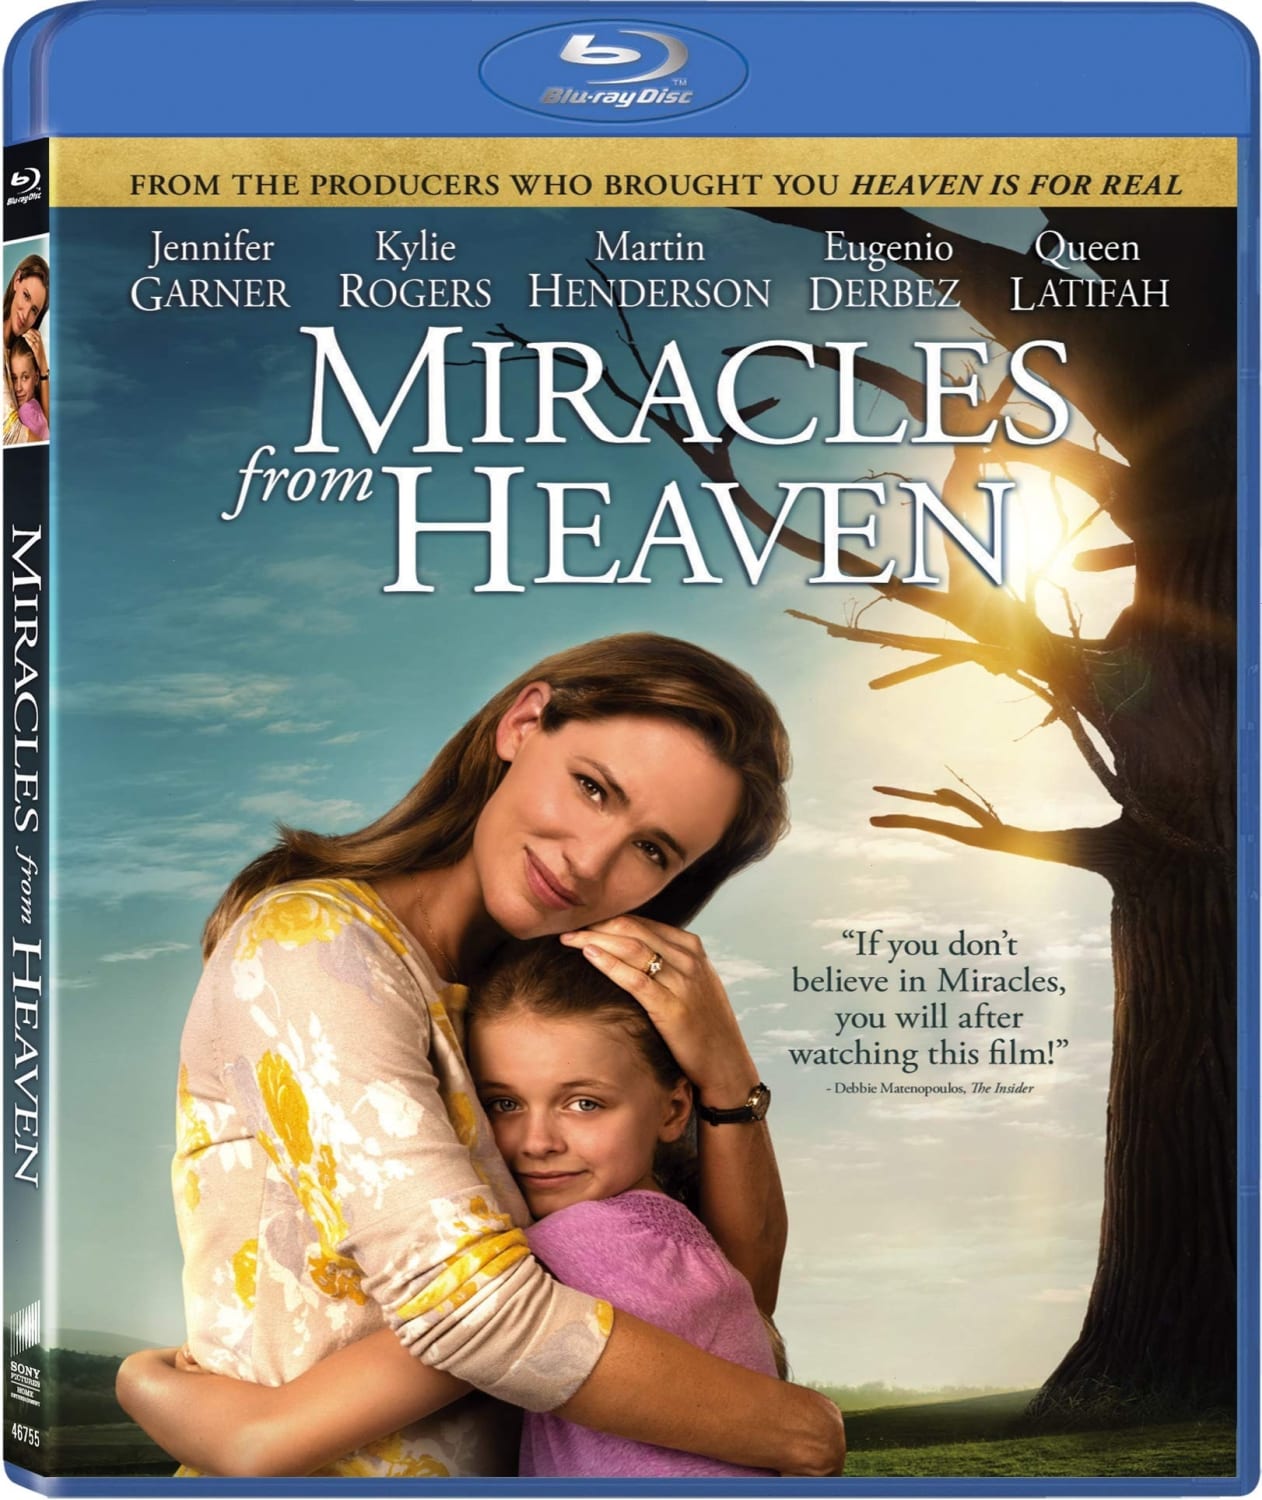 Miracles From Heaven (Blu-ray) on MovieShack